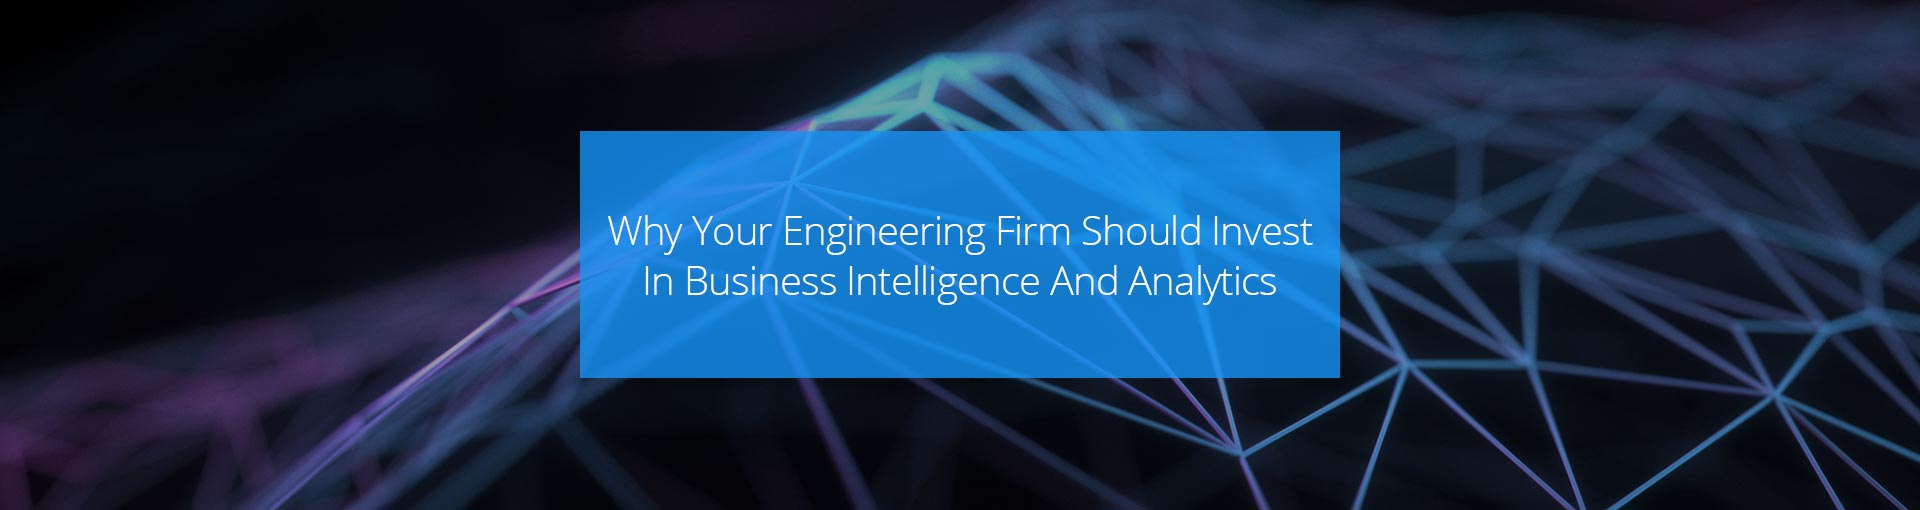 Why Your Engineering Firm Should Invest In Business Intelligence And Analytics Featured Image